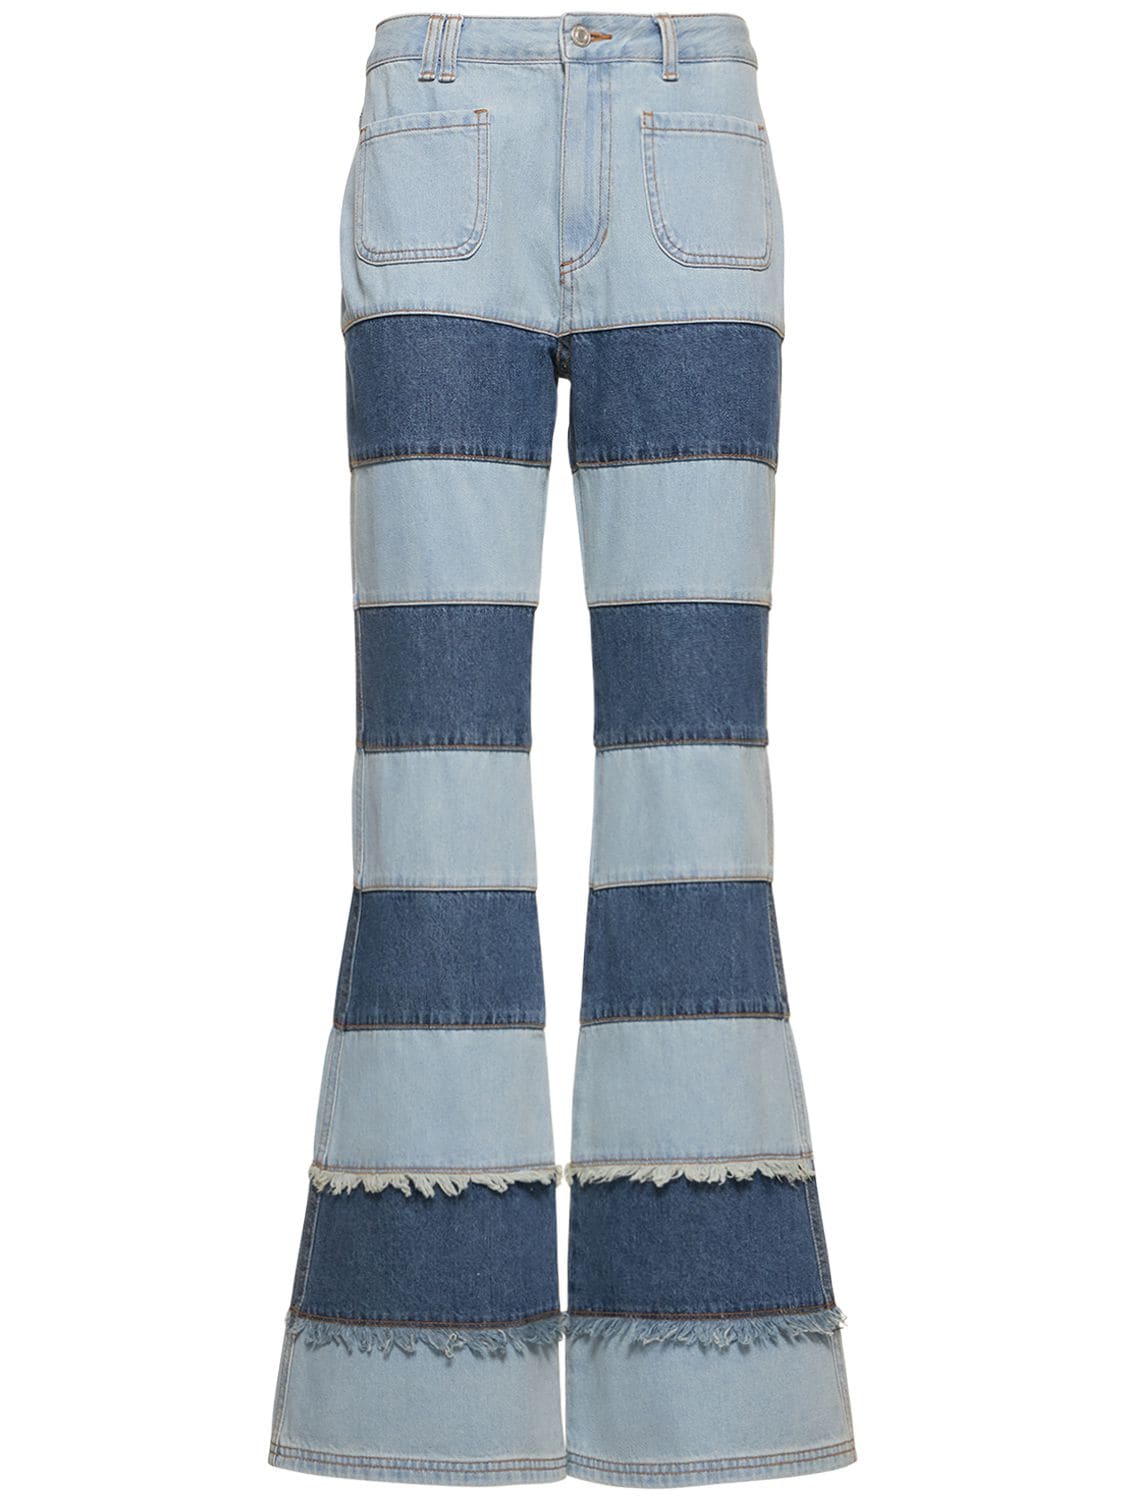 Mujer Jeans Rectos Con Patchwork 25 - ANDERSSON BELL - Modalova